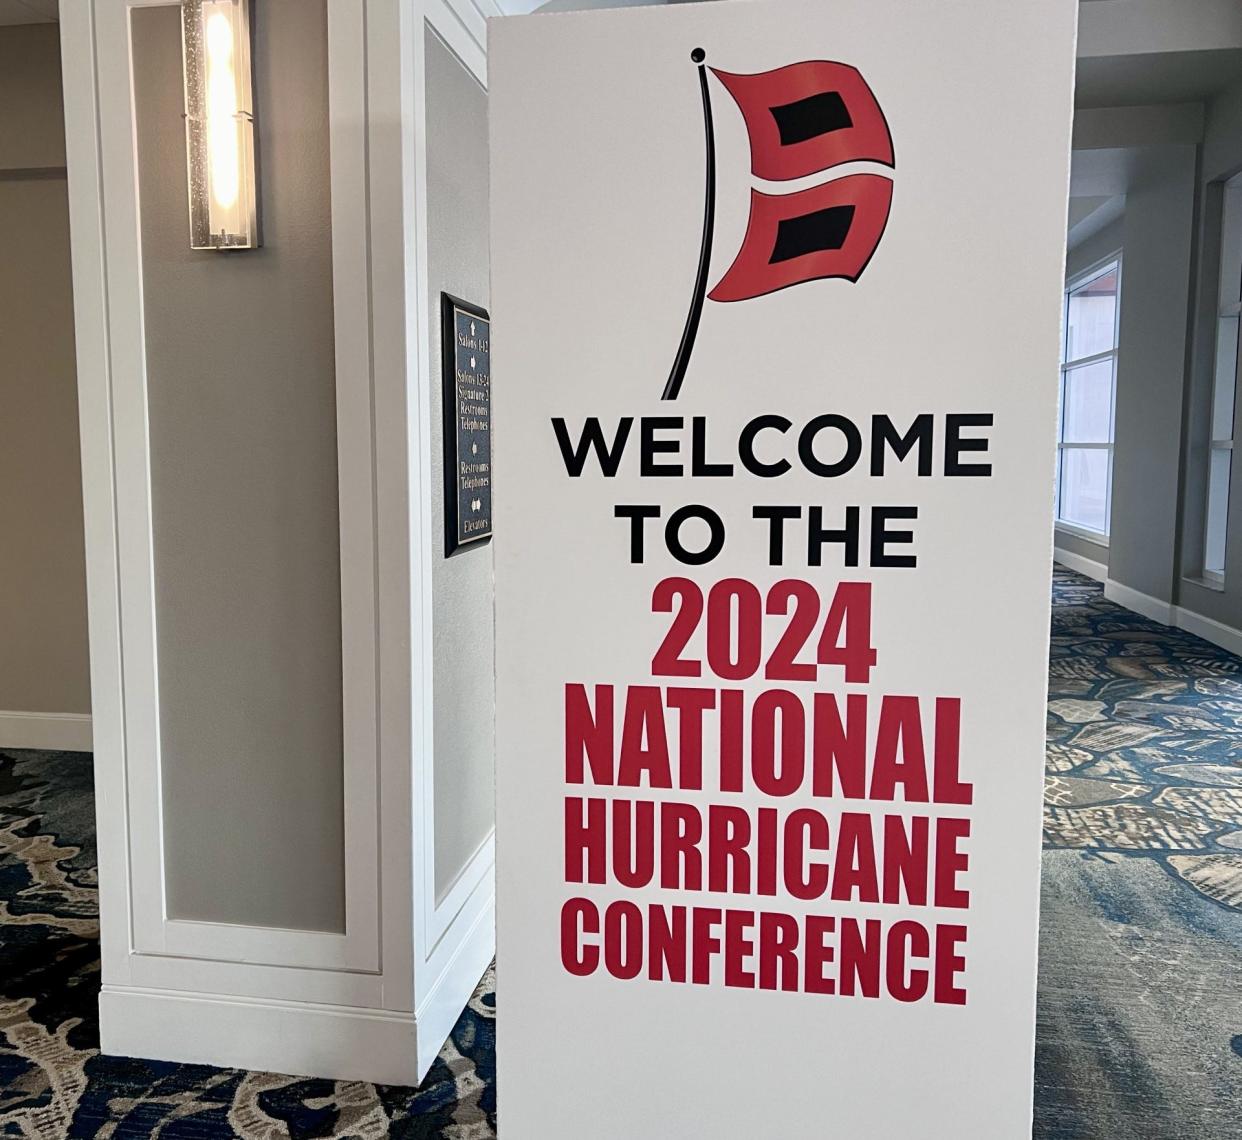 The 2024 National Hurricane Conference is being held in Orlando the week of March 25-28.